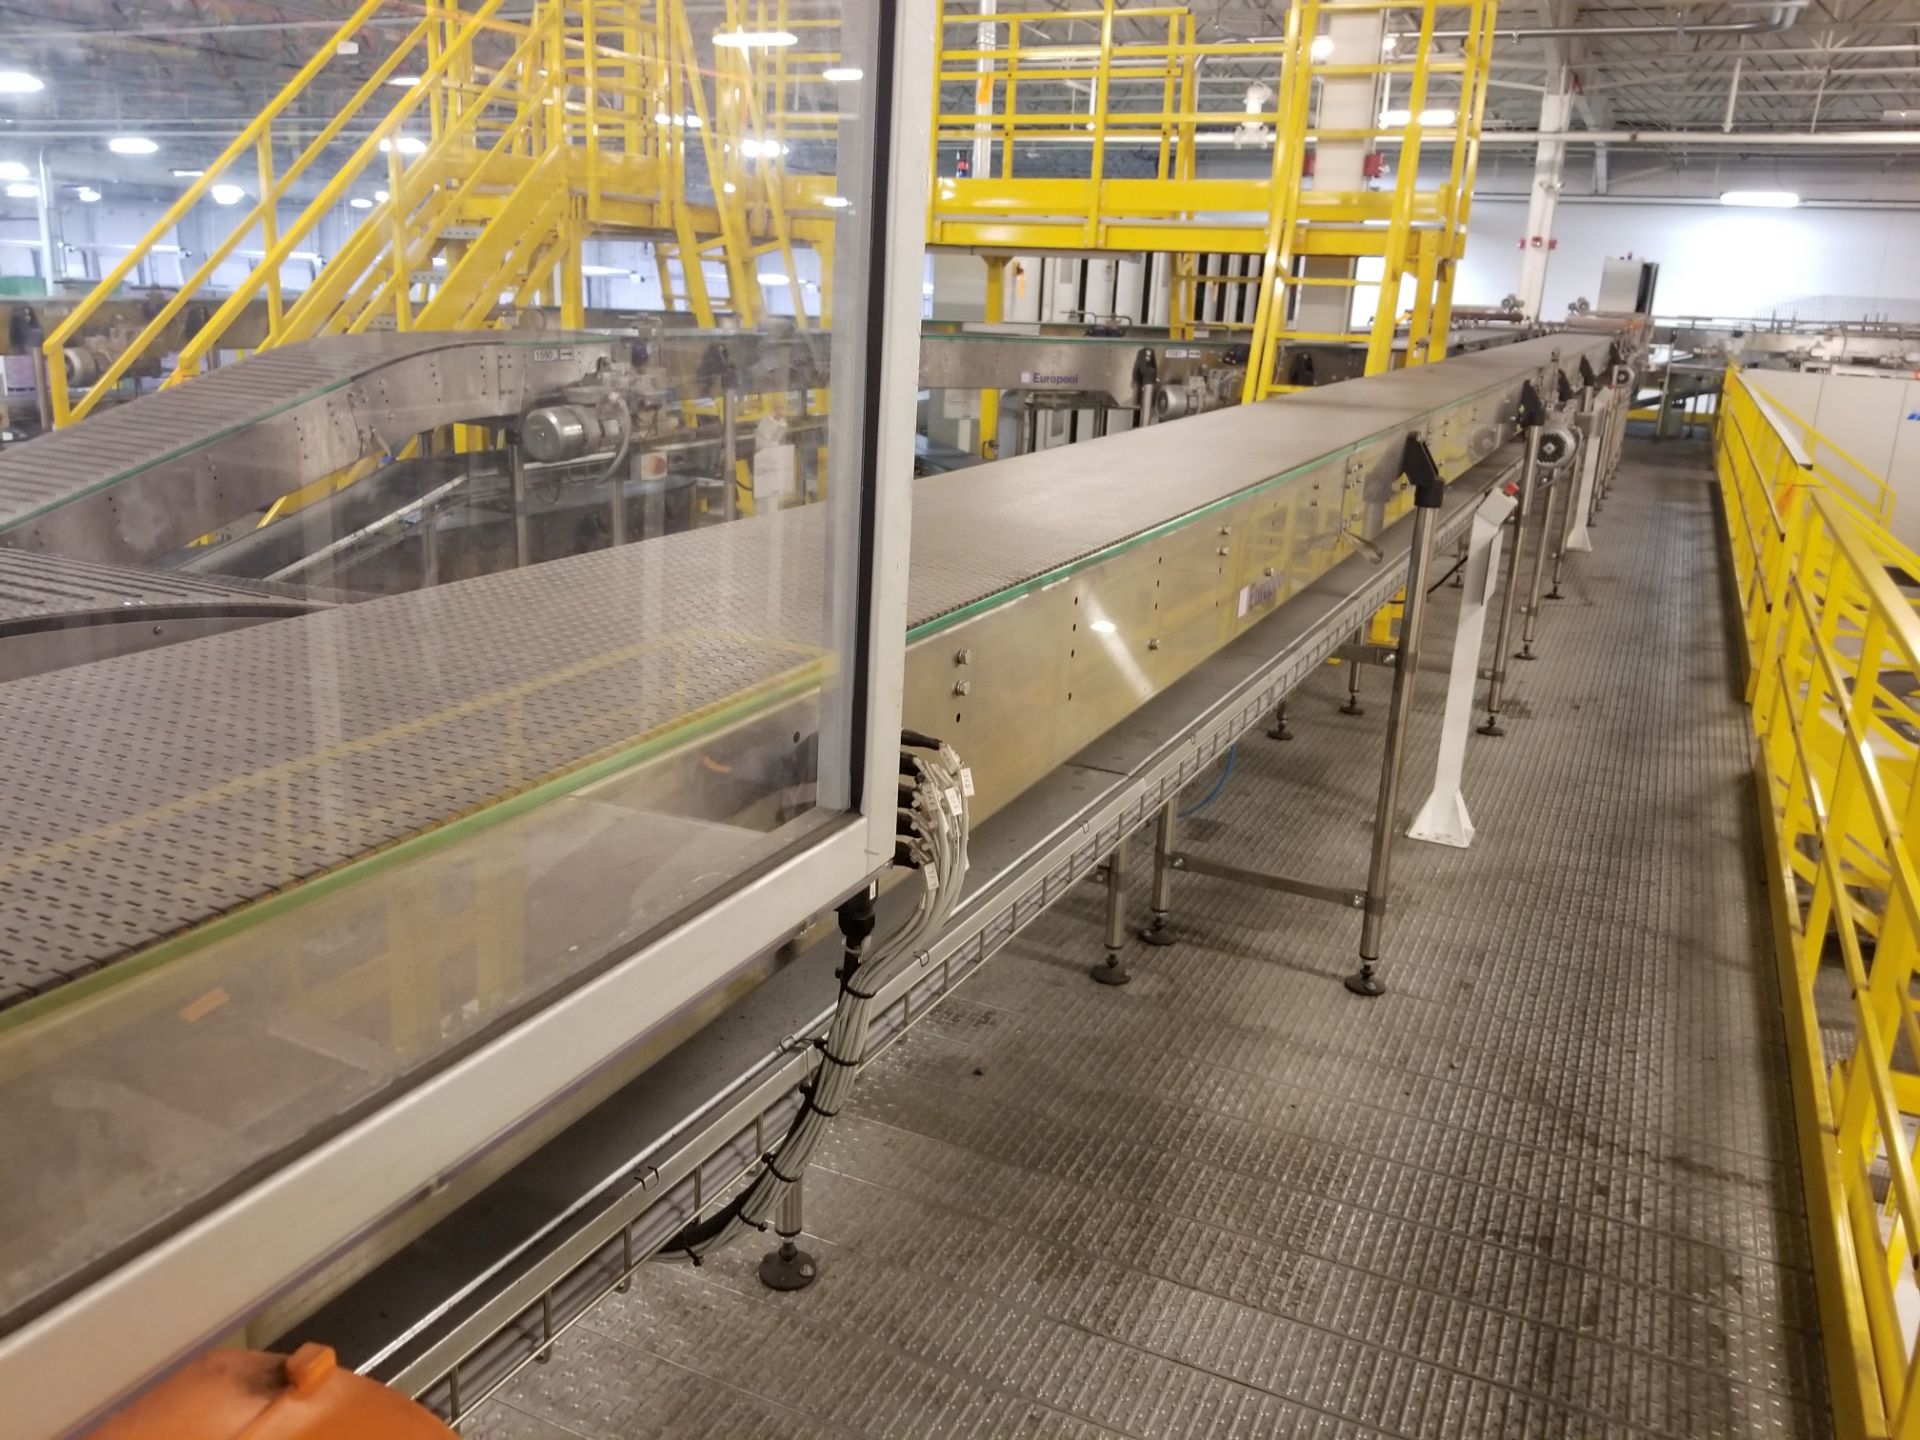 Approx. 40 feet of Europool Case Conveyor - Discharge of Case Switch - Image 2 of 5